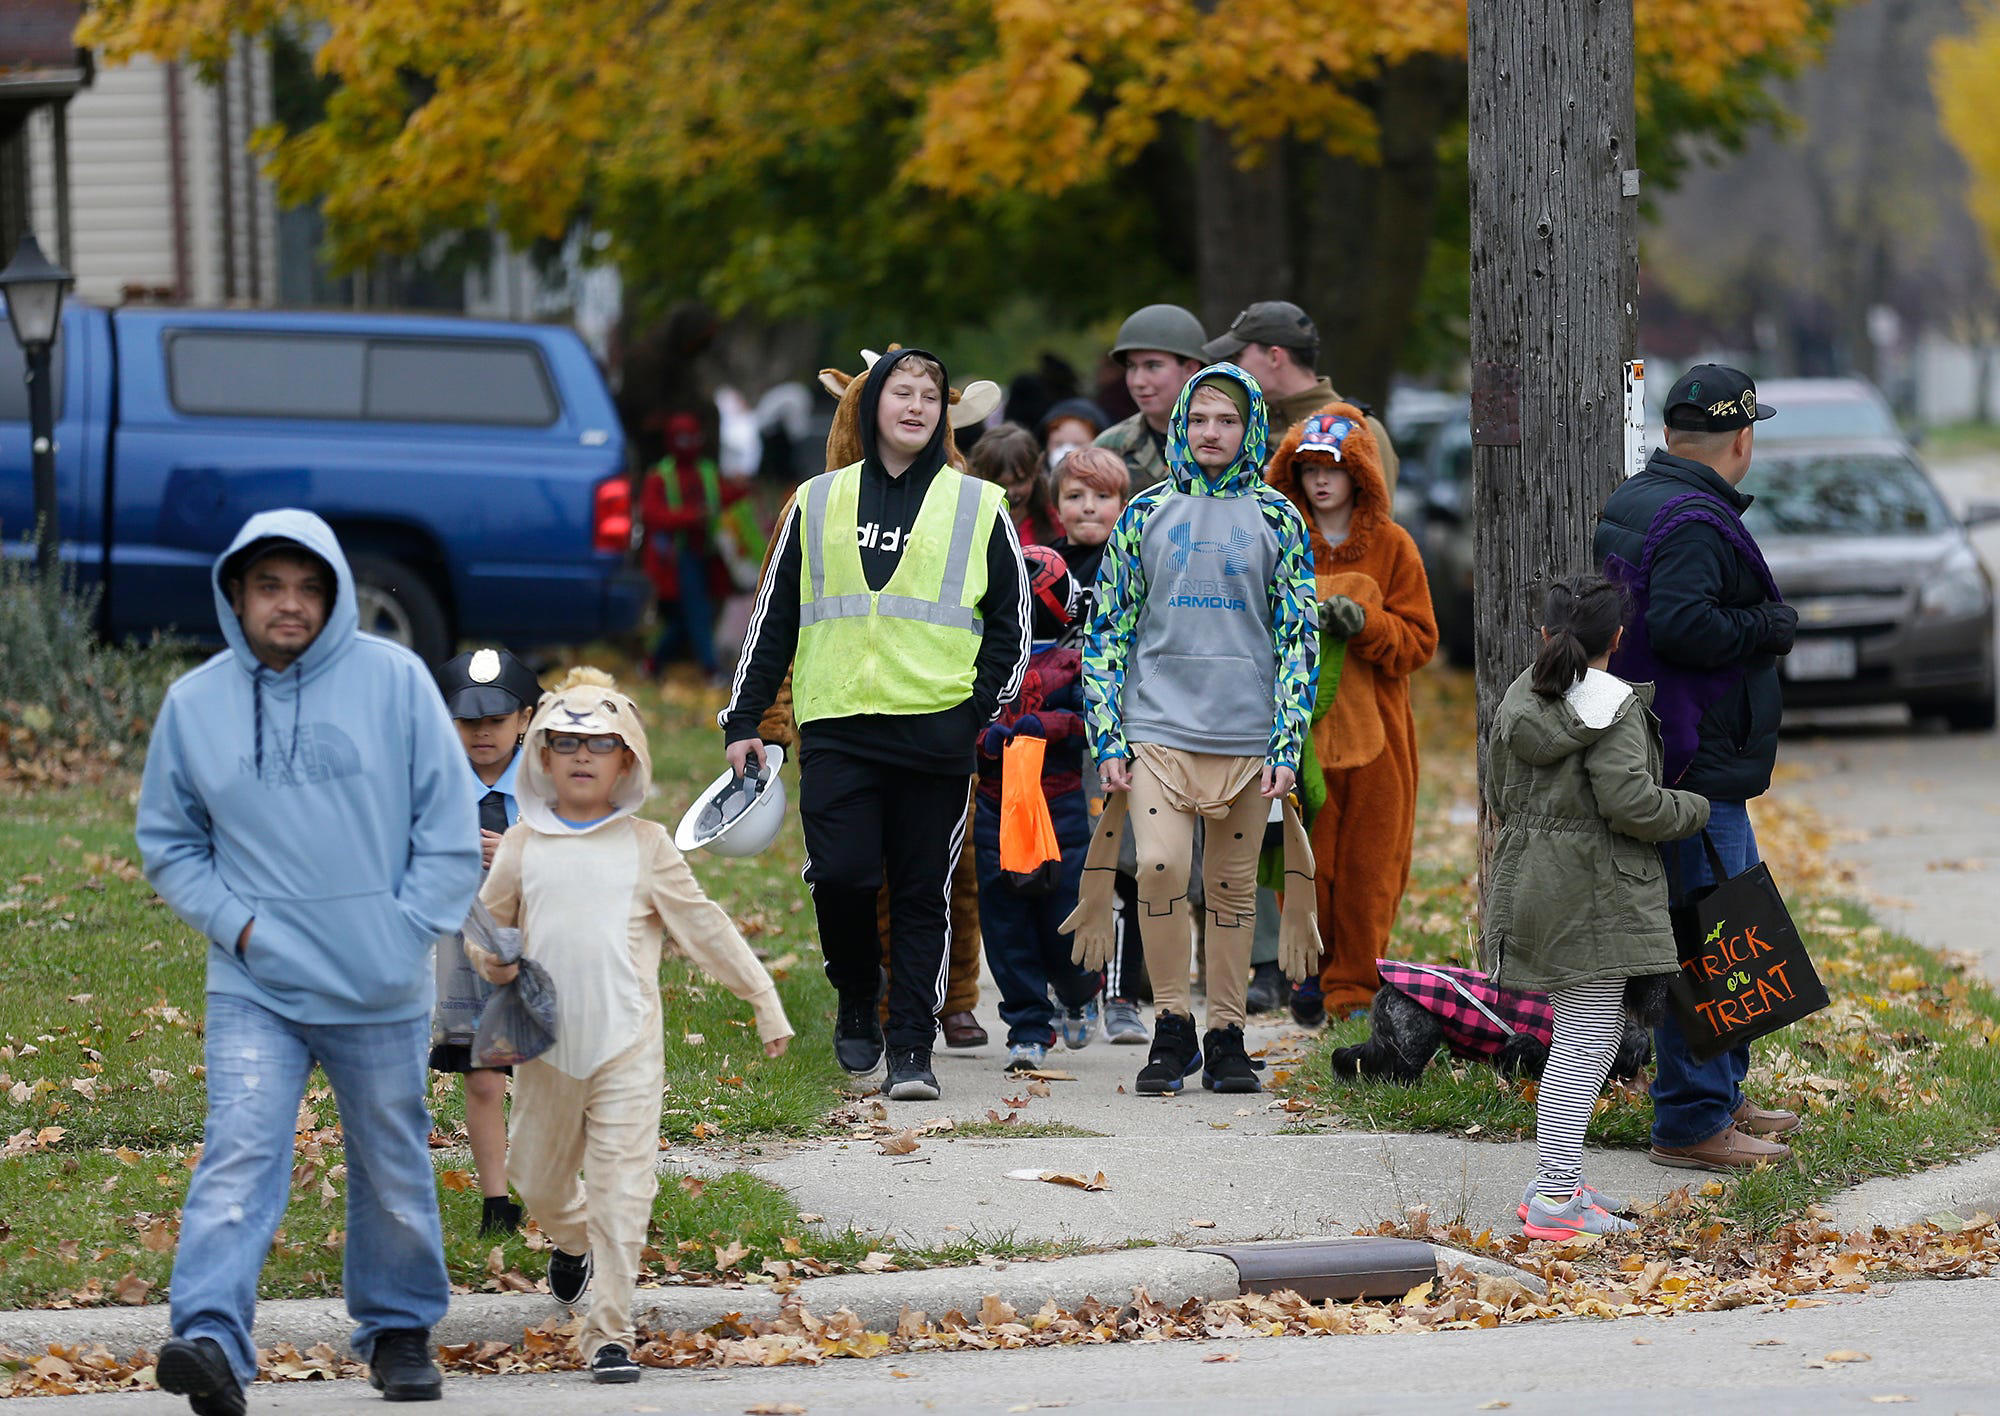 What time is trickortreating in your area? Check here for Fond du Lac